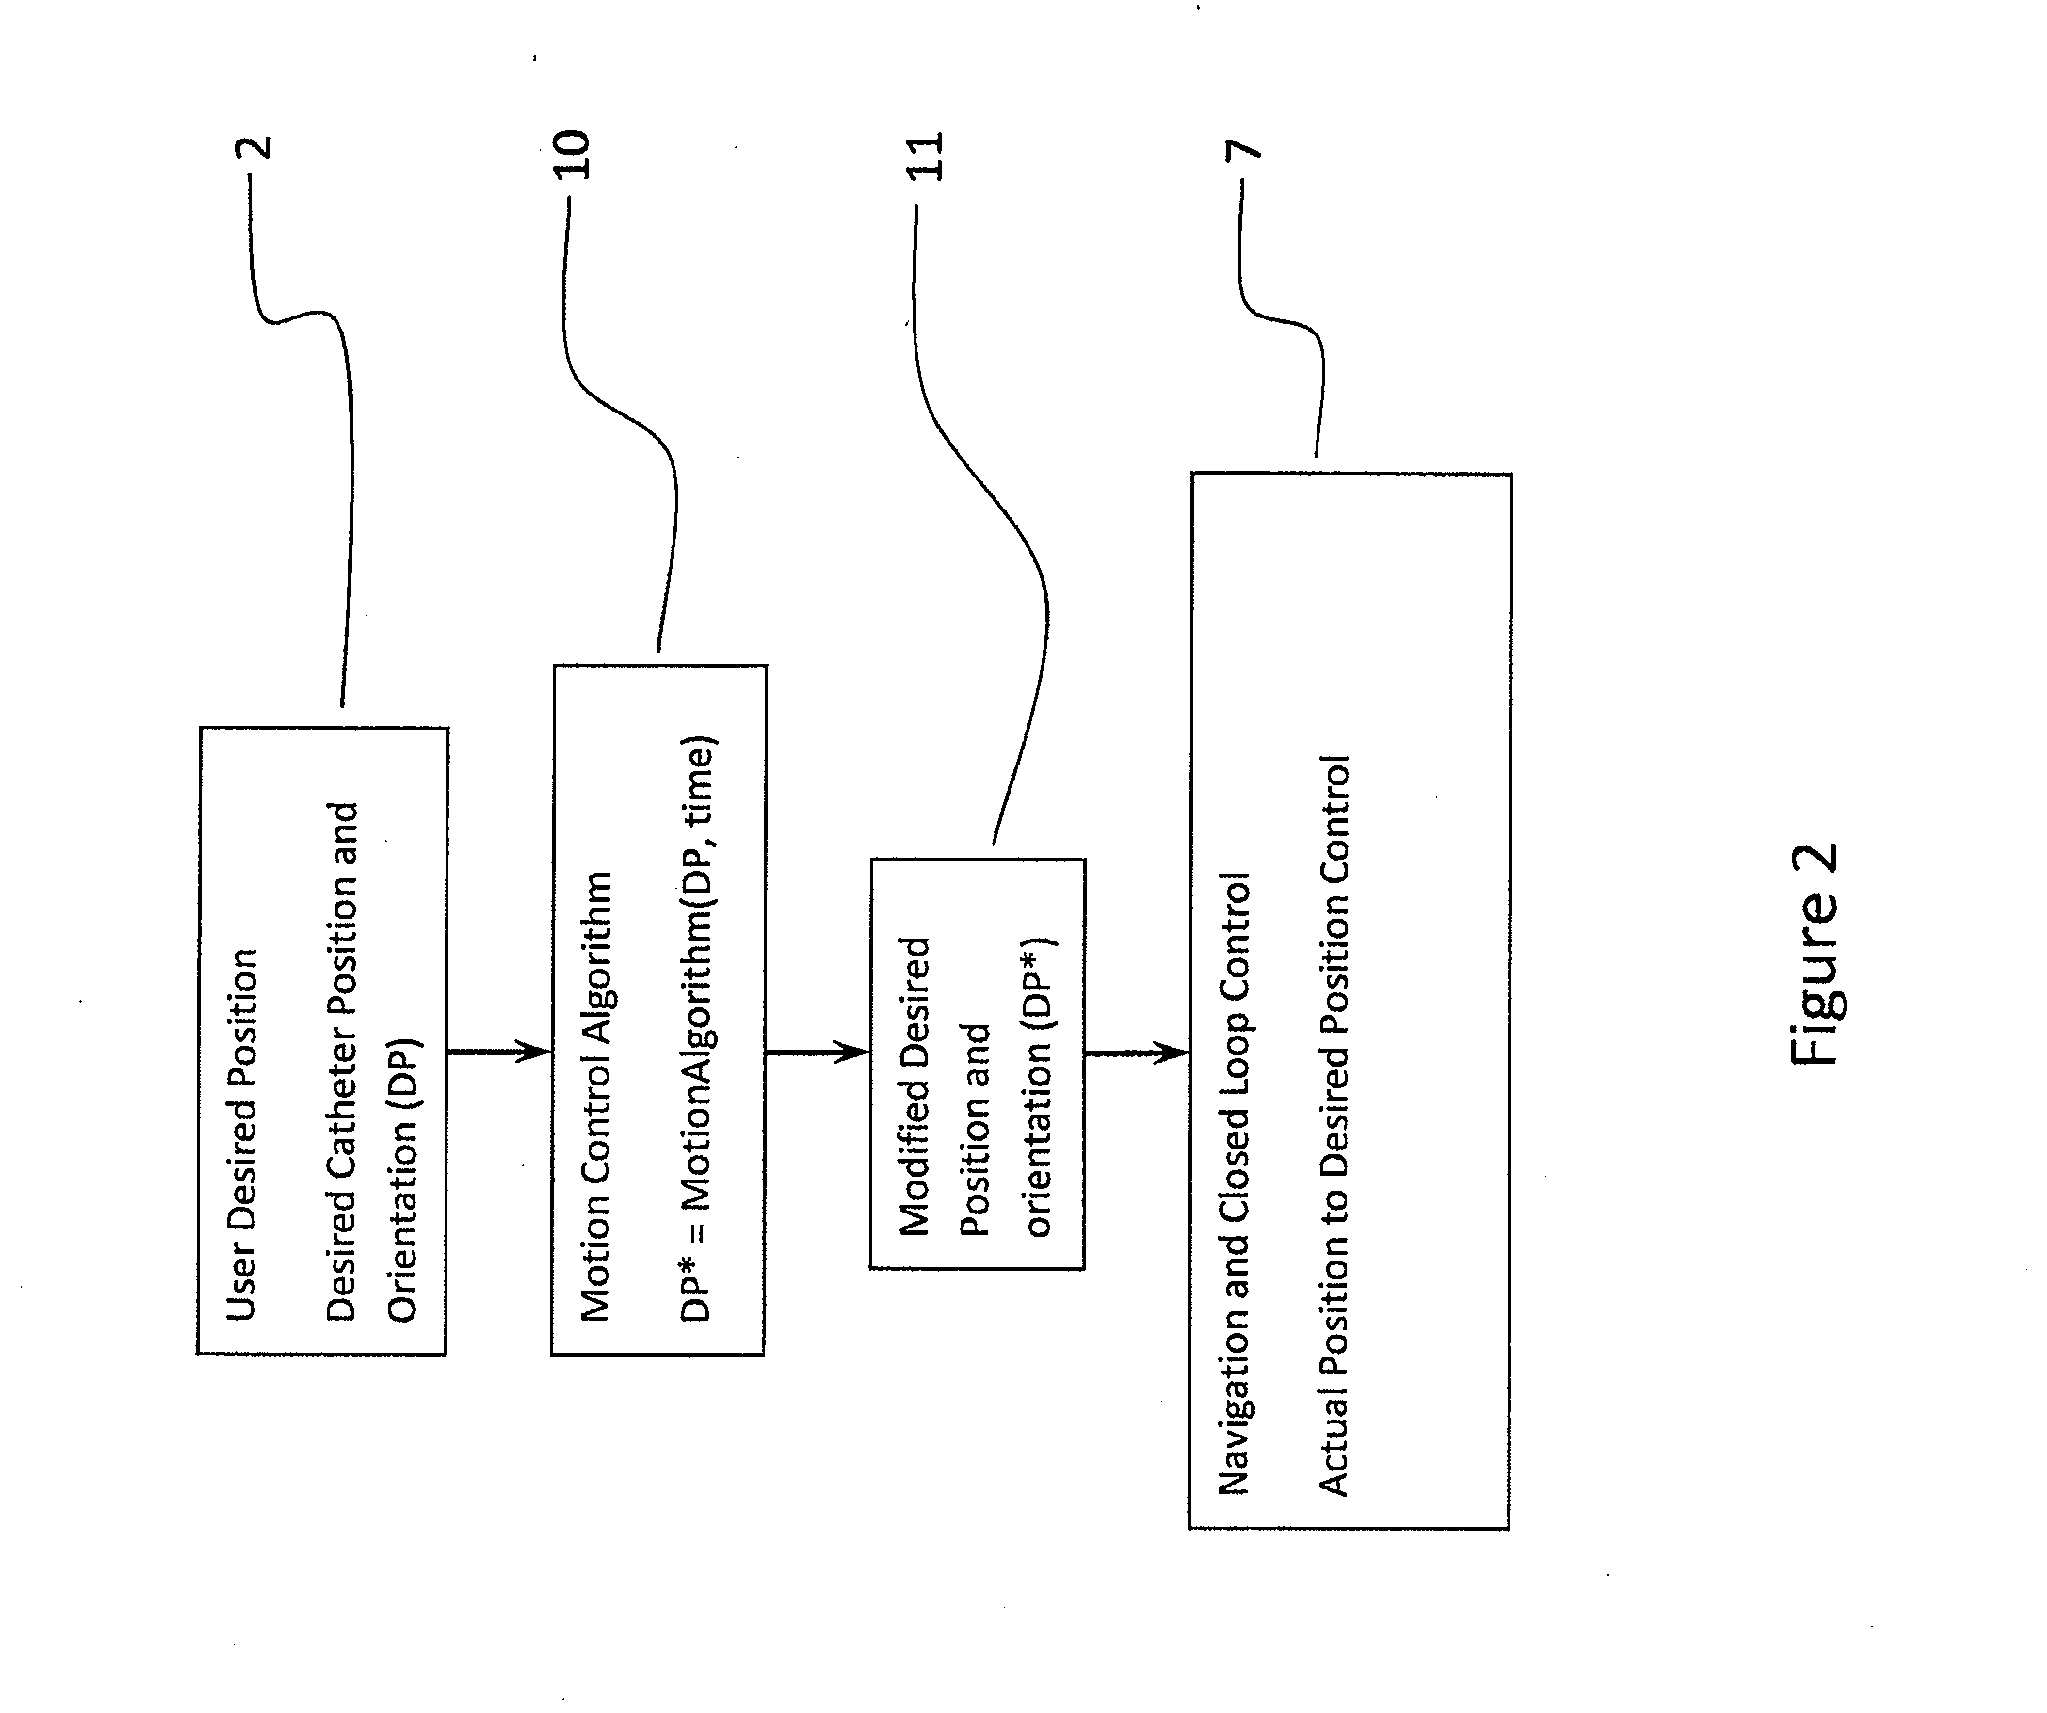 Method for acquiring high density mapping data with a catheter guidance system